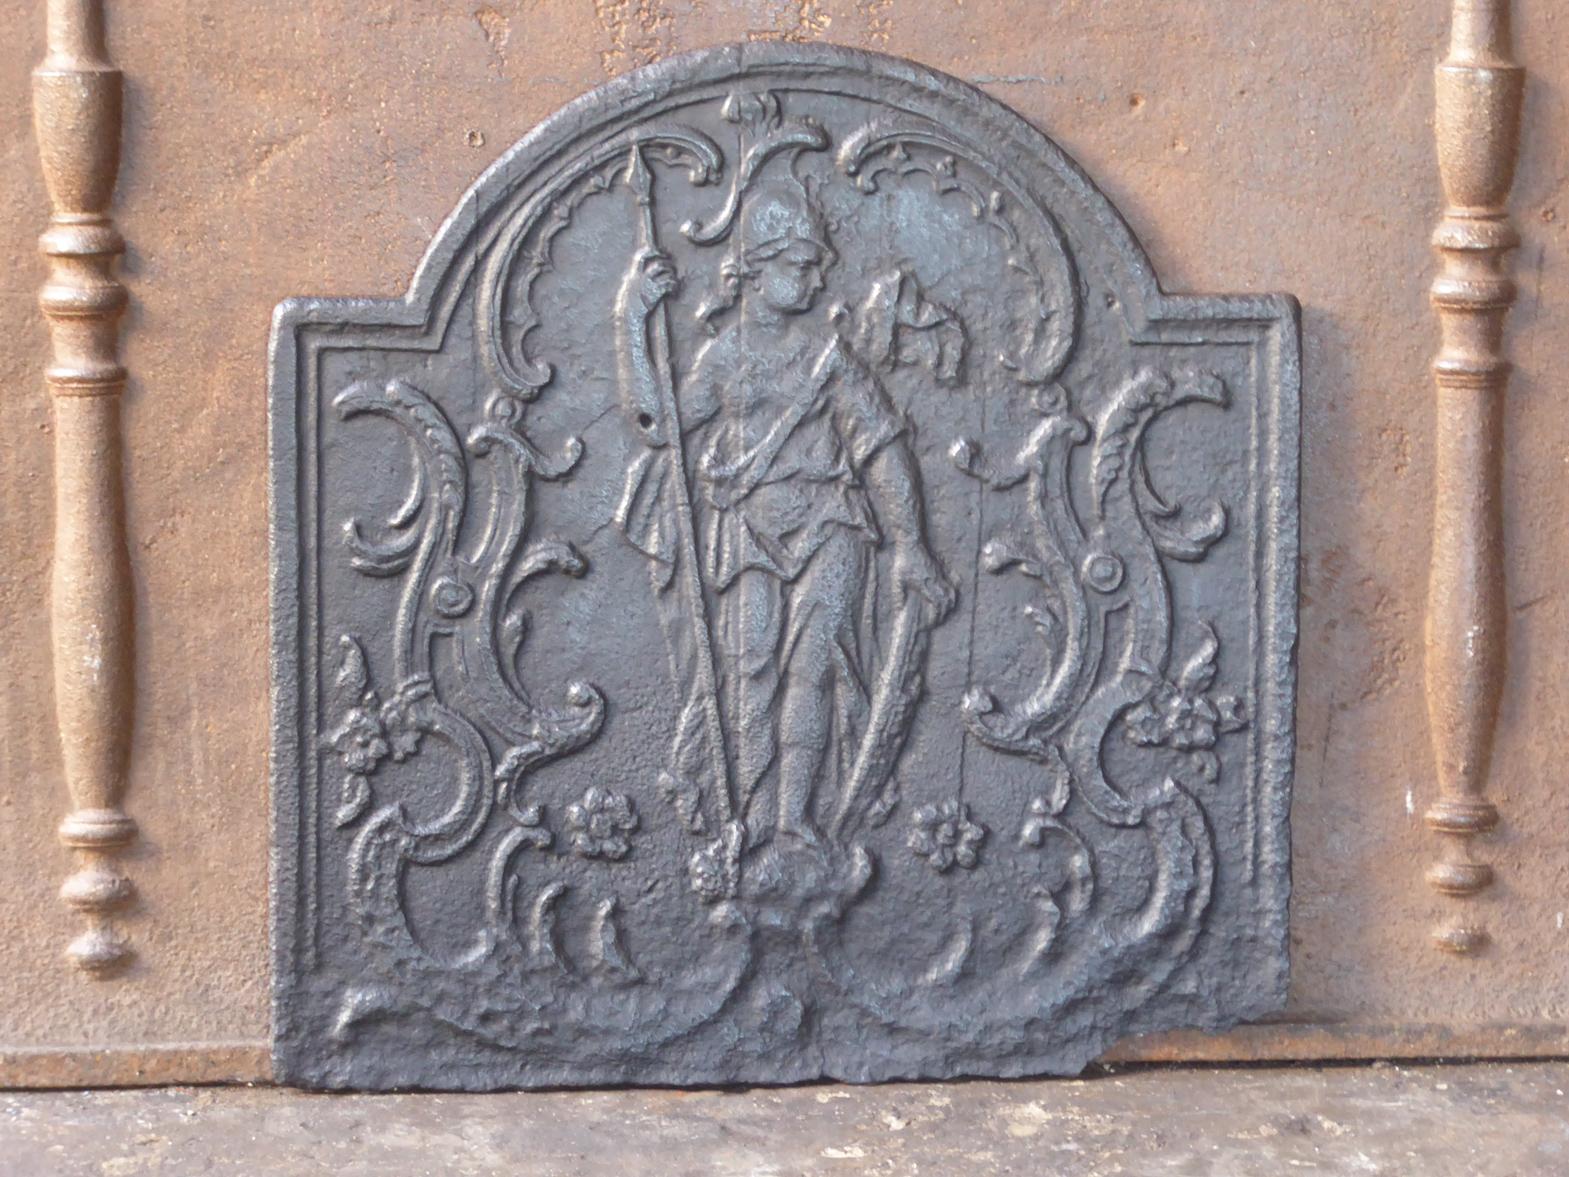 18th - 19th century French neoclassical fireback with the goddess Minerva. Goddess of knowledge, intellect and ingenuity of the human spirit. She is often depicted with an owl, symbol of wisdom.

The fireback is made of cast iron and has a black /